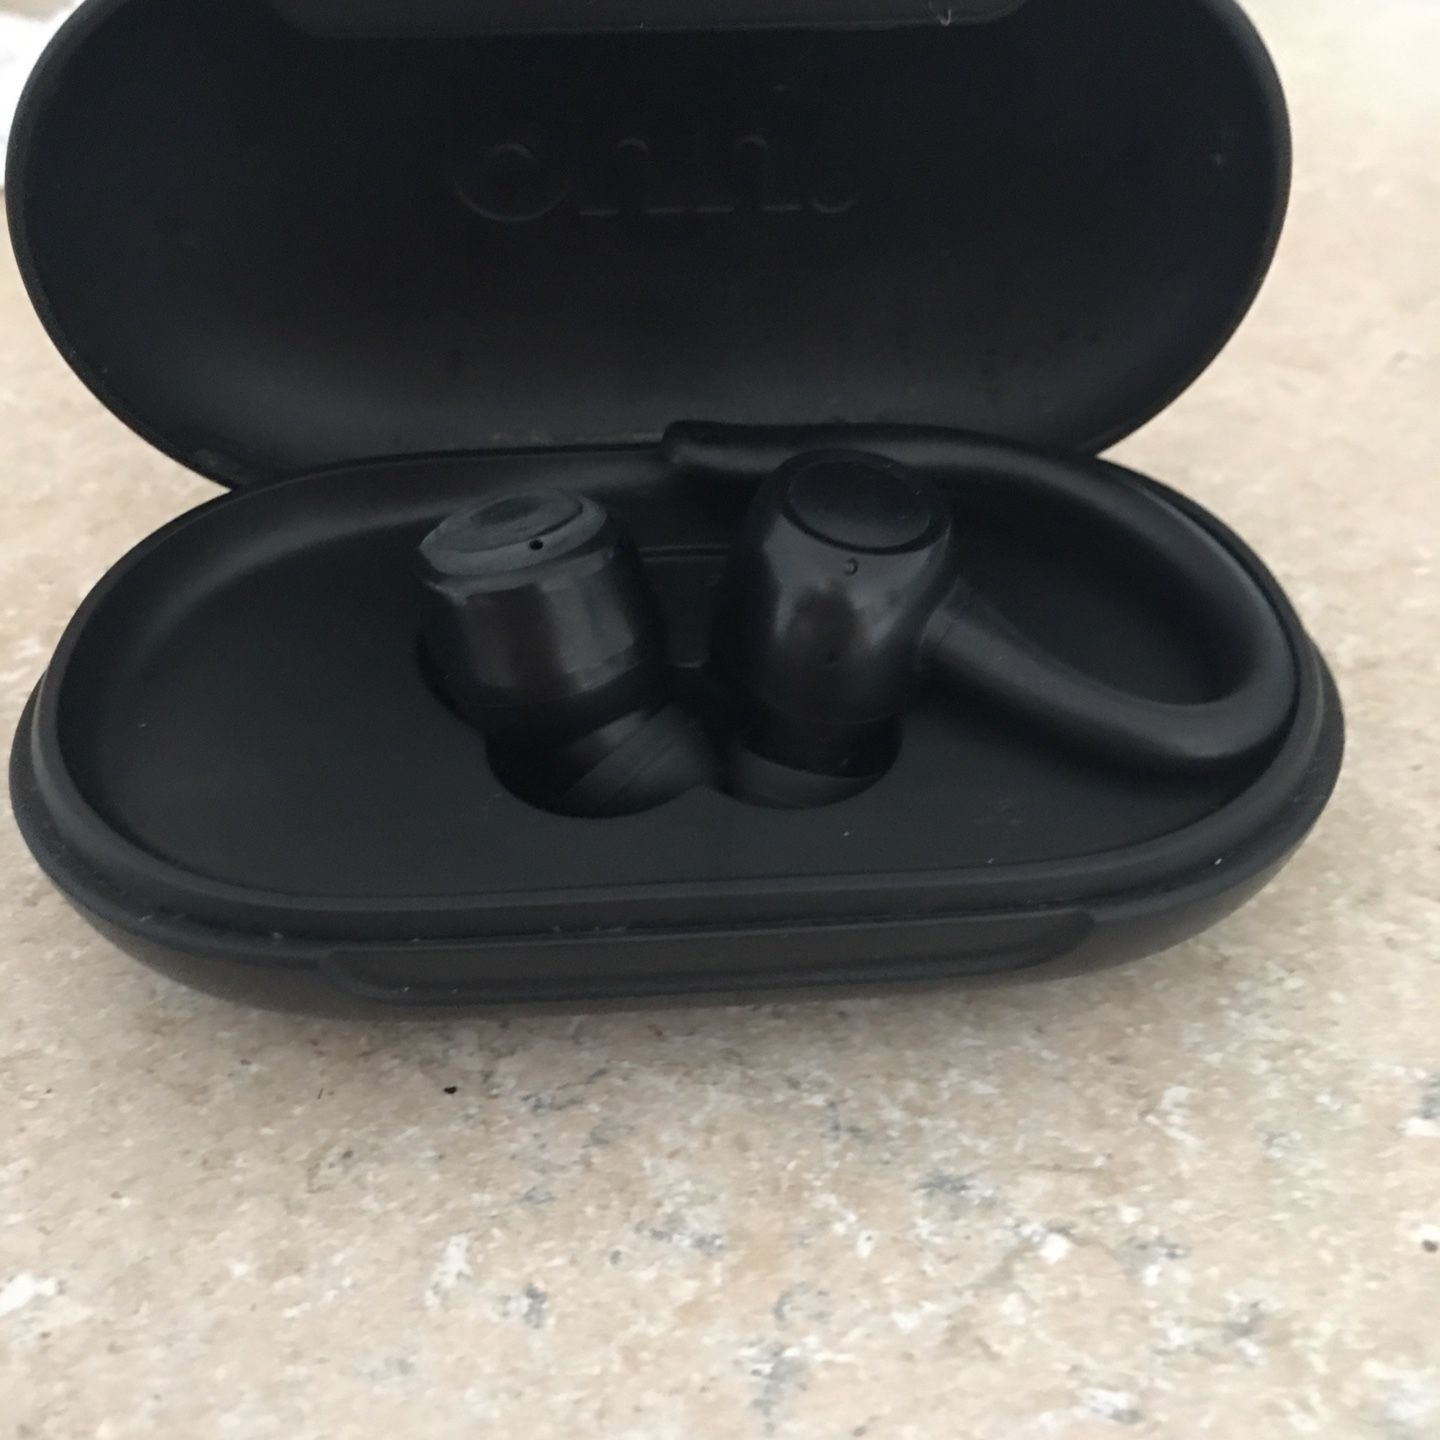 Onn Wireless Earbuds With Charging Case